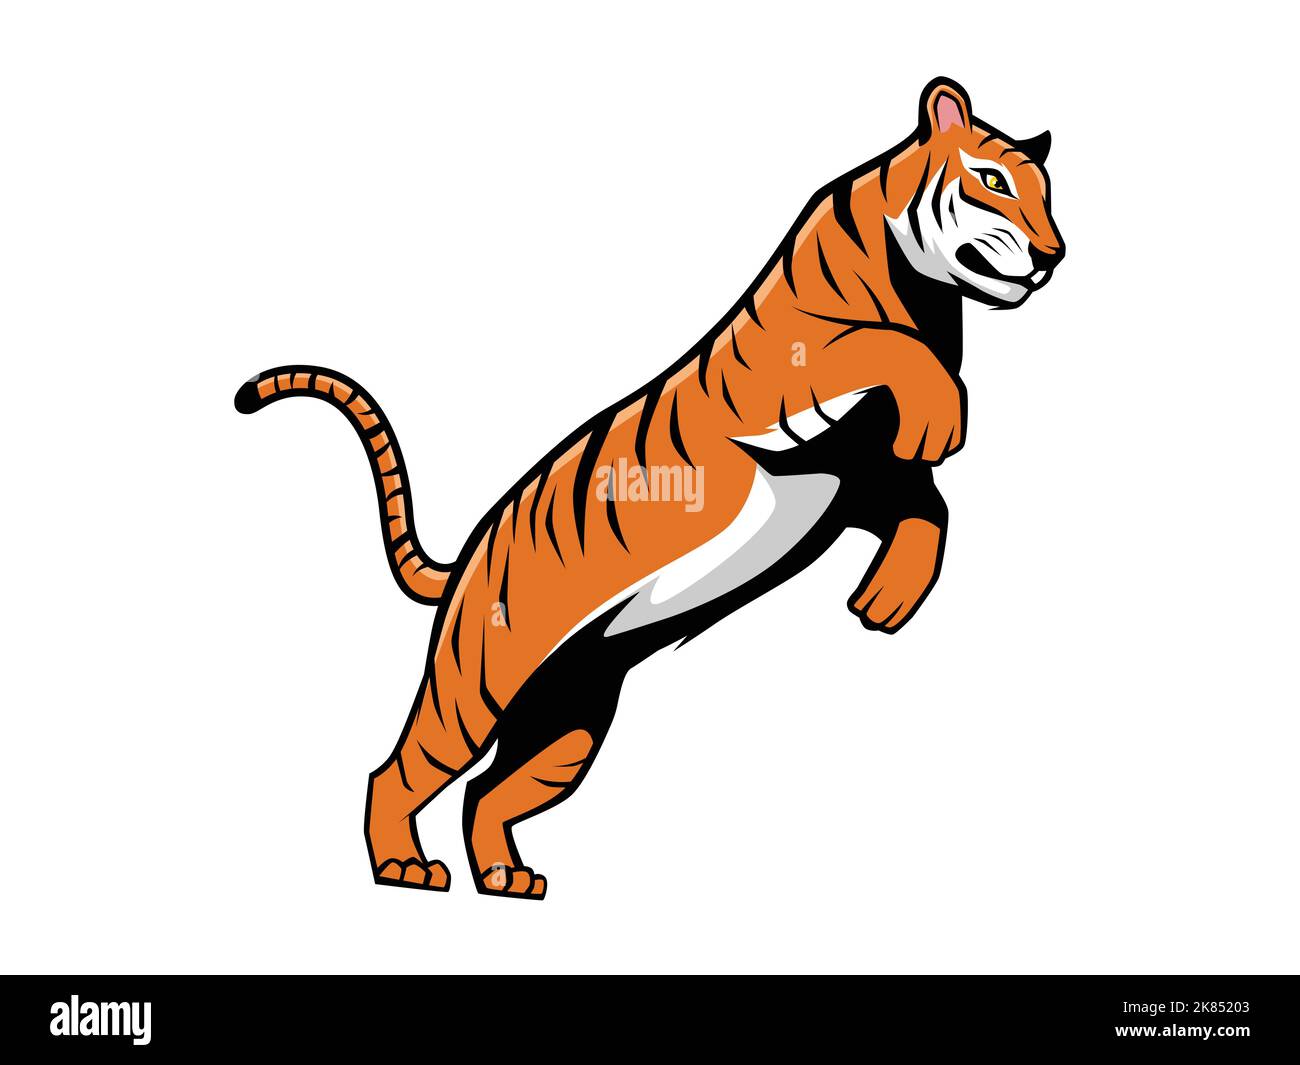 Tiger Jump Vector Cartoon Illustration Mascot Logo Isolated on a White Background Stock Vector